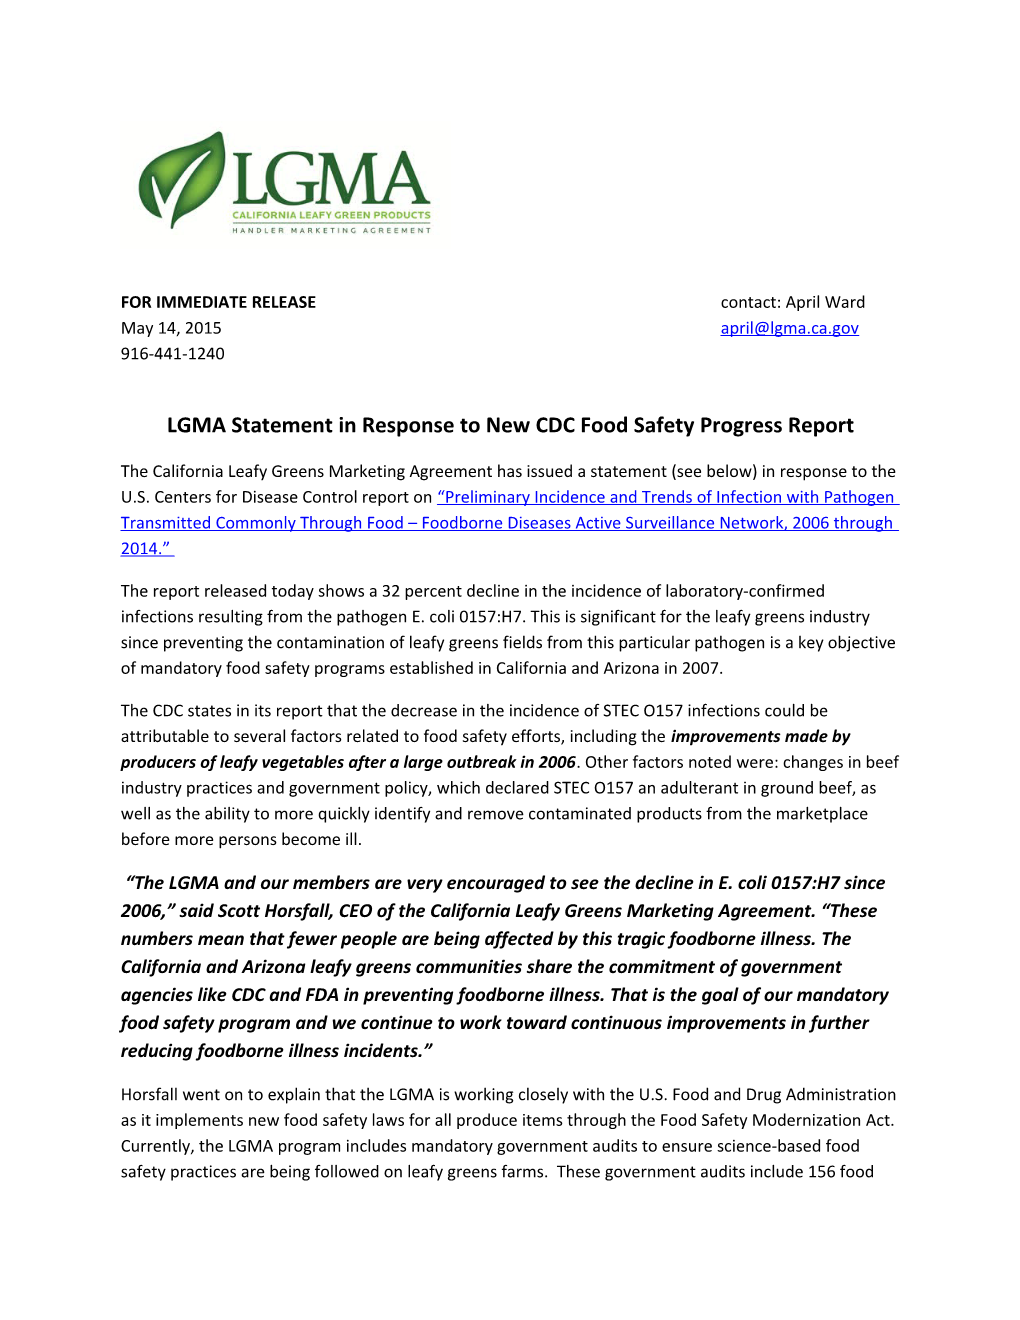 LGMA Statement in Response to New CDC Food Safety Progress Report